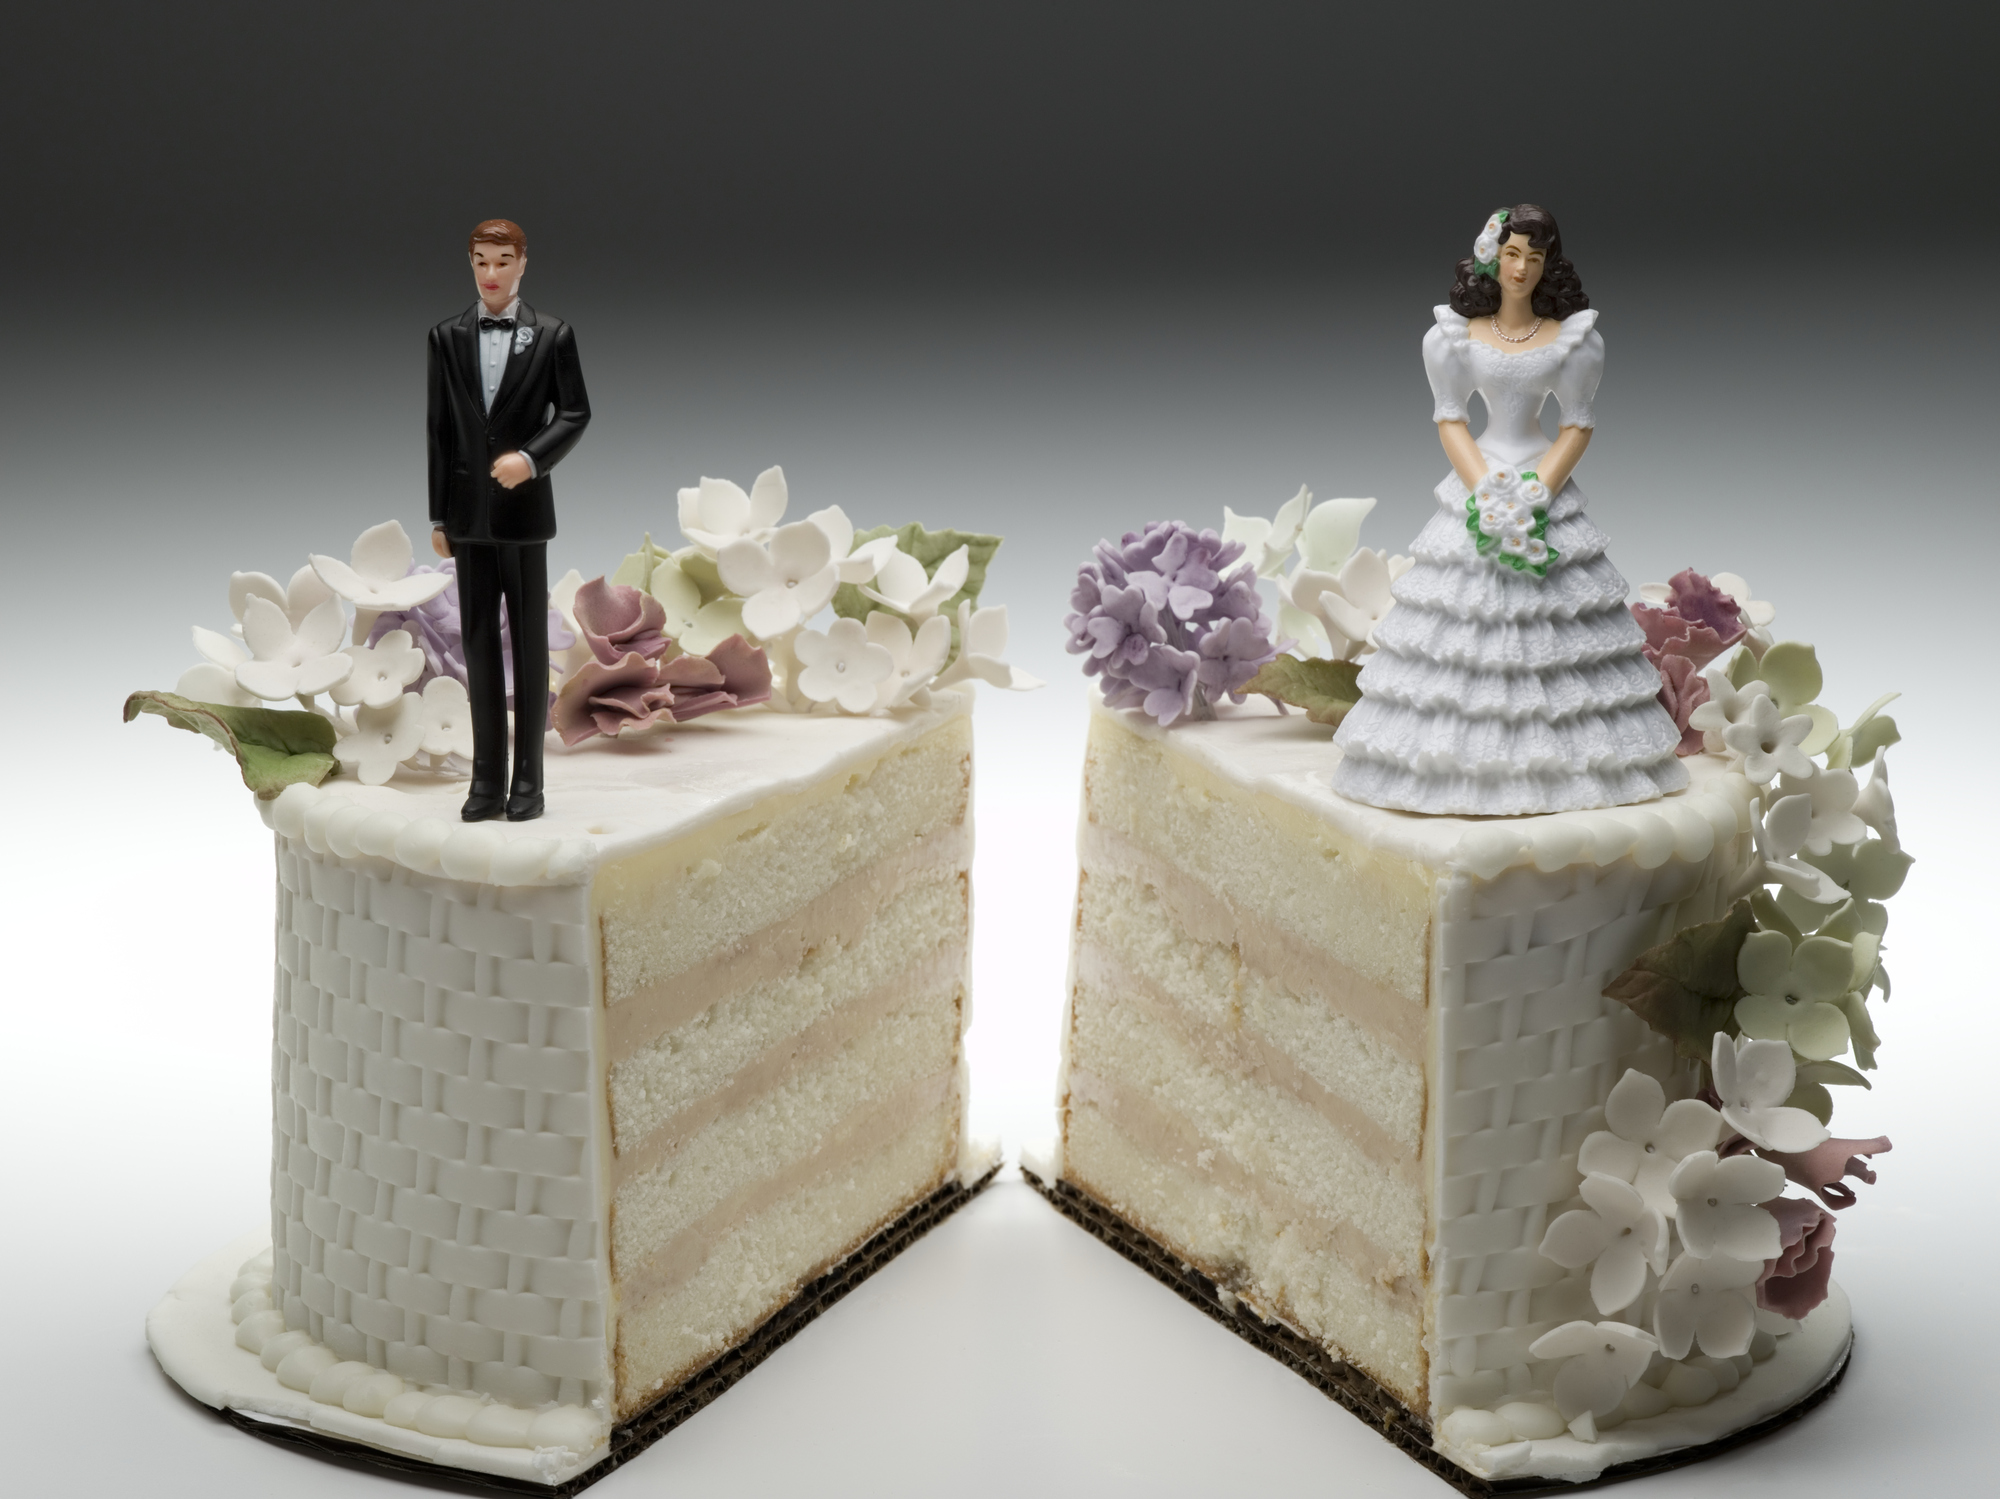 Newlyweds: Don’t Let Financial Stress Take The Cake